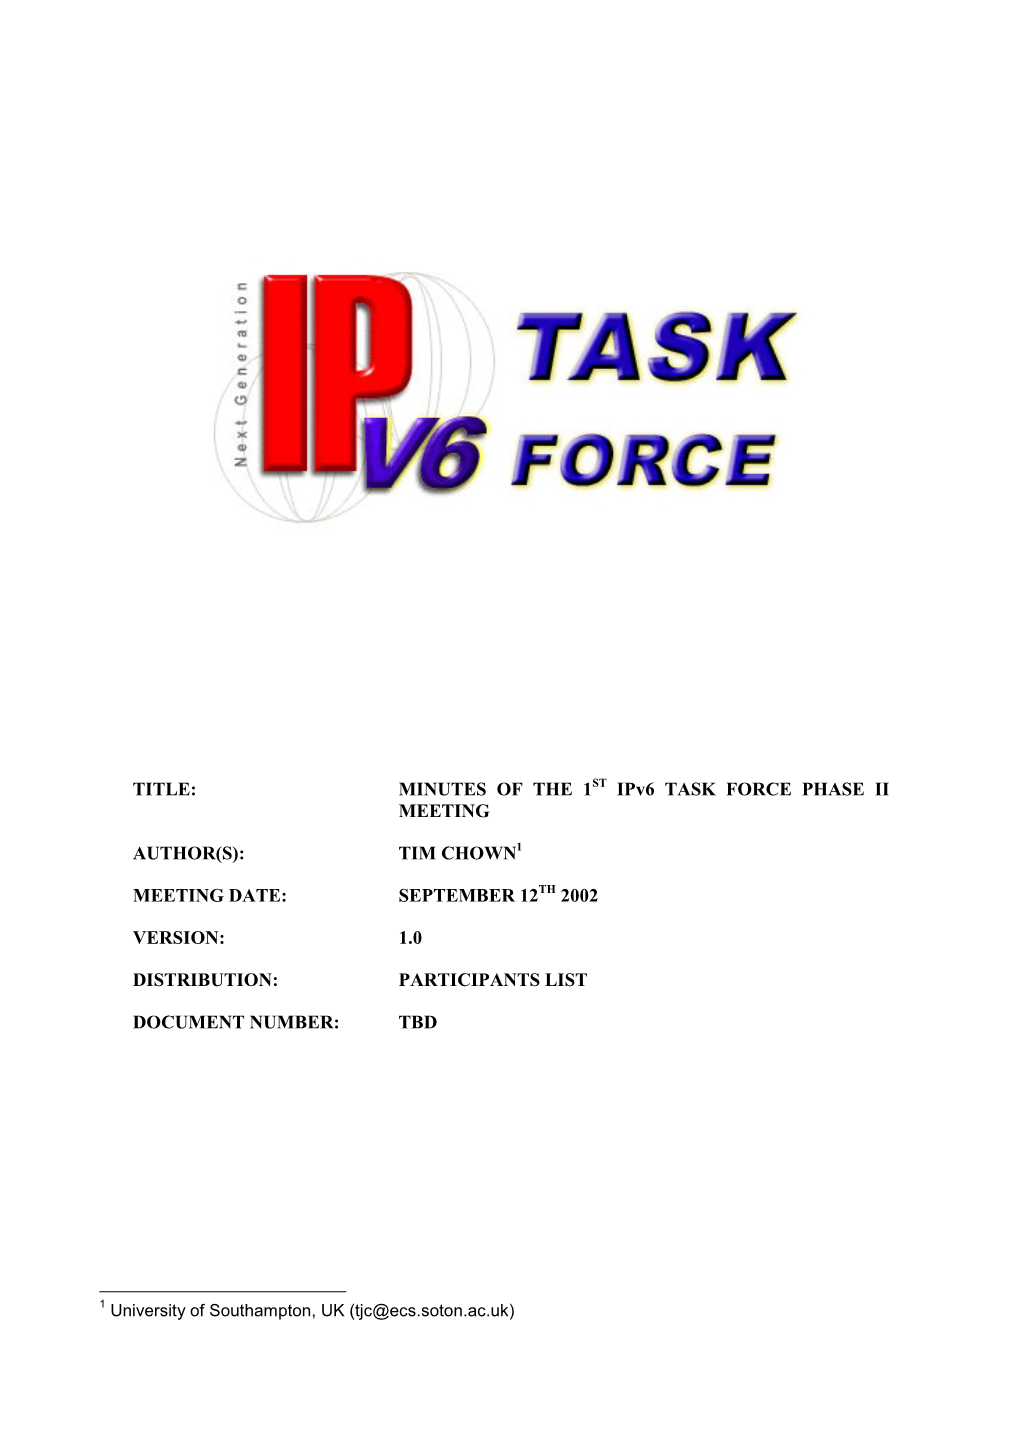 TITLE: MINUTES of the 1ST Ipv6 TASK FORCE PHASE II MEETING